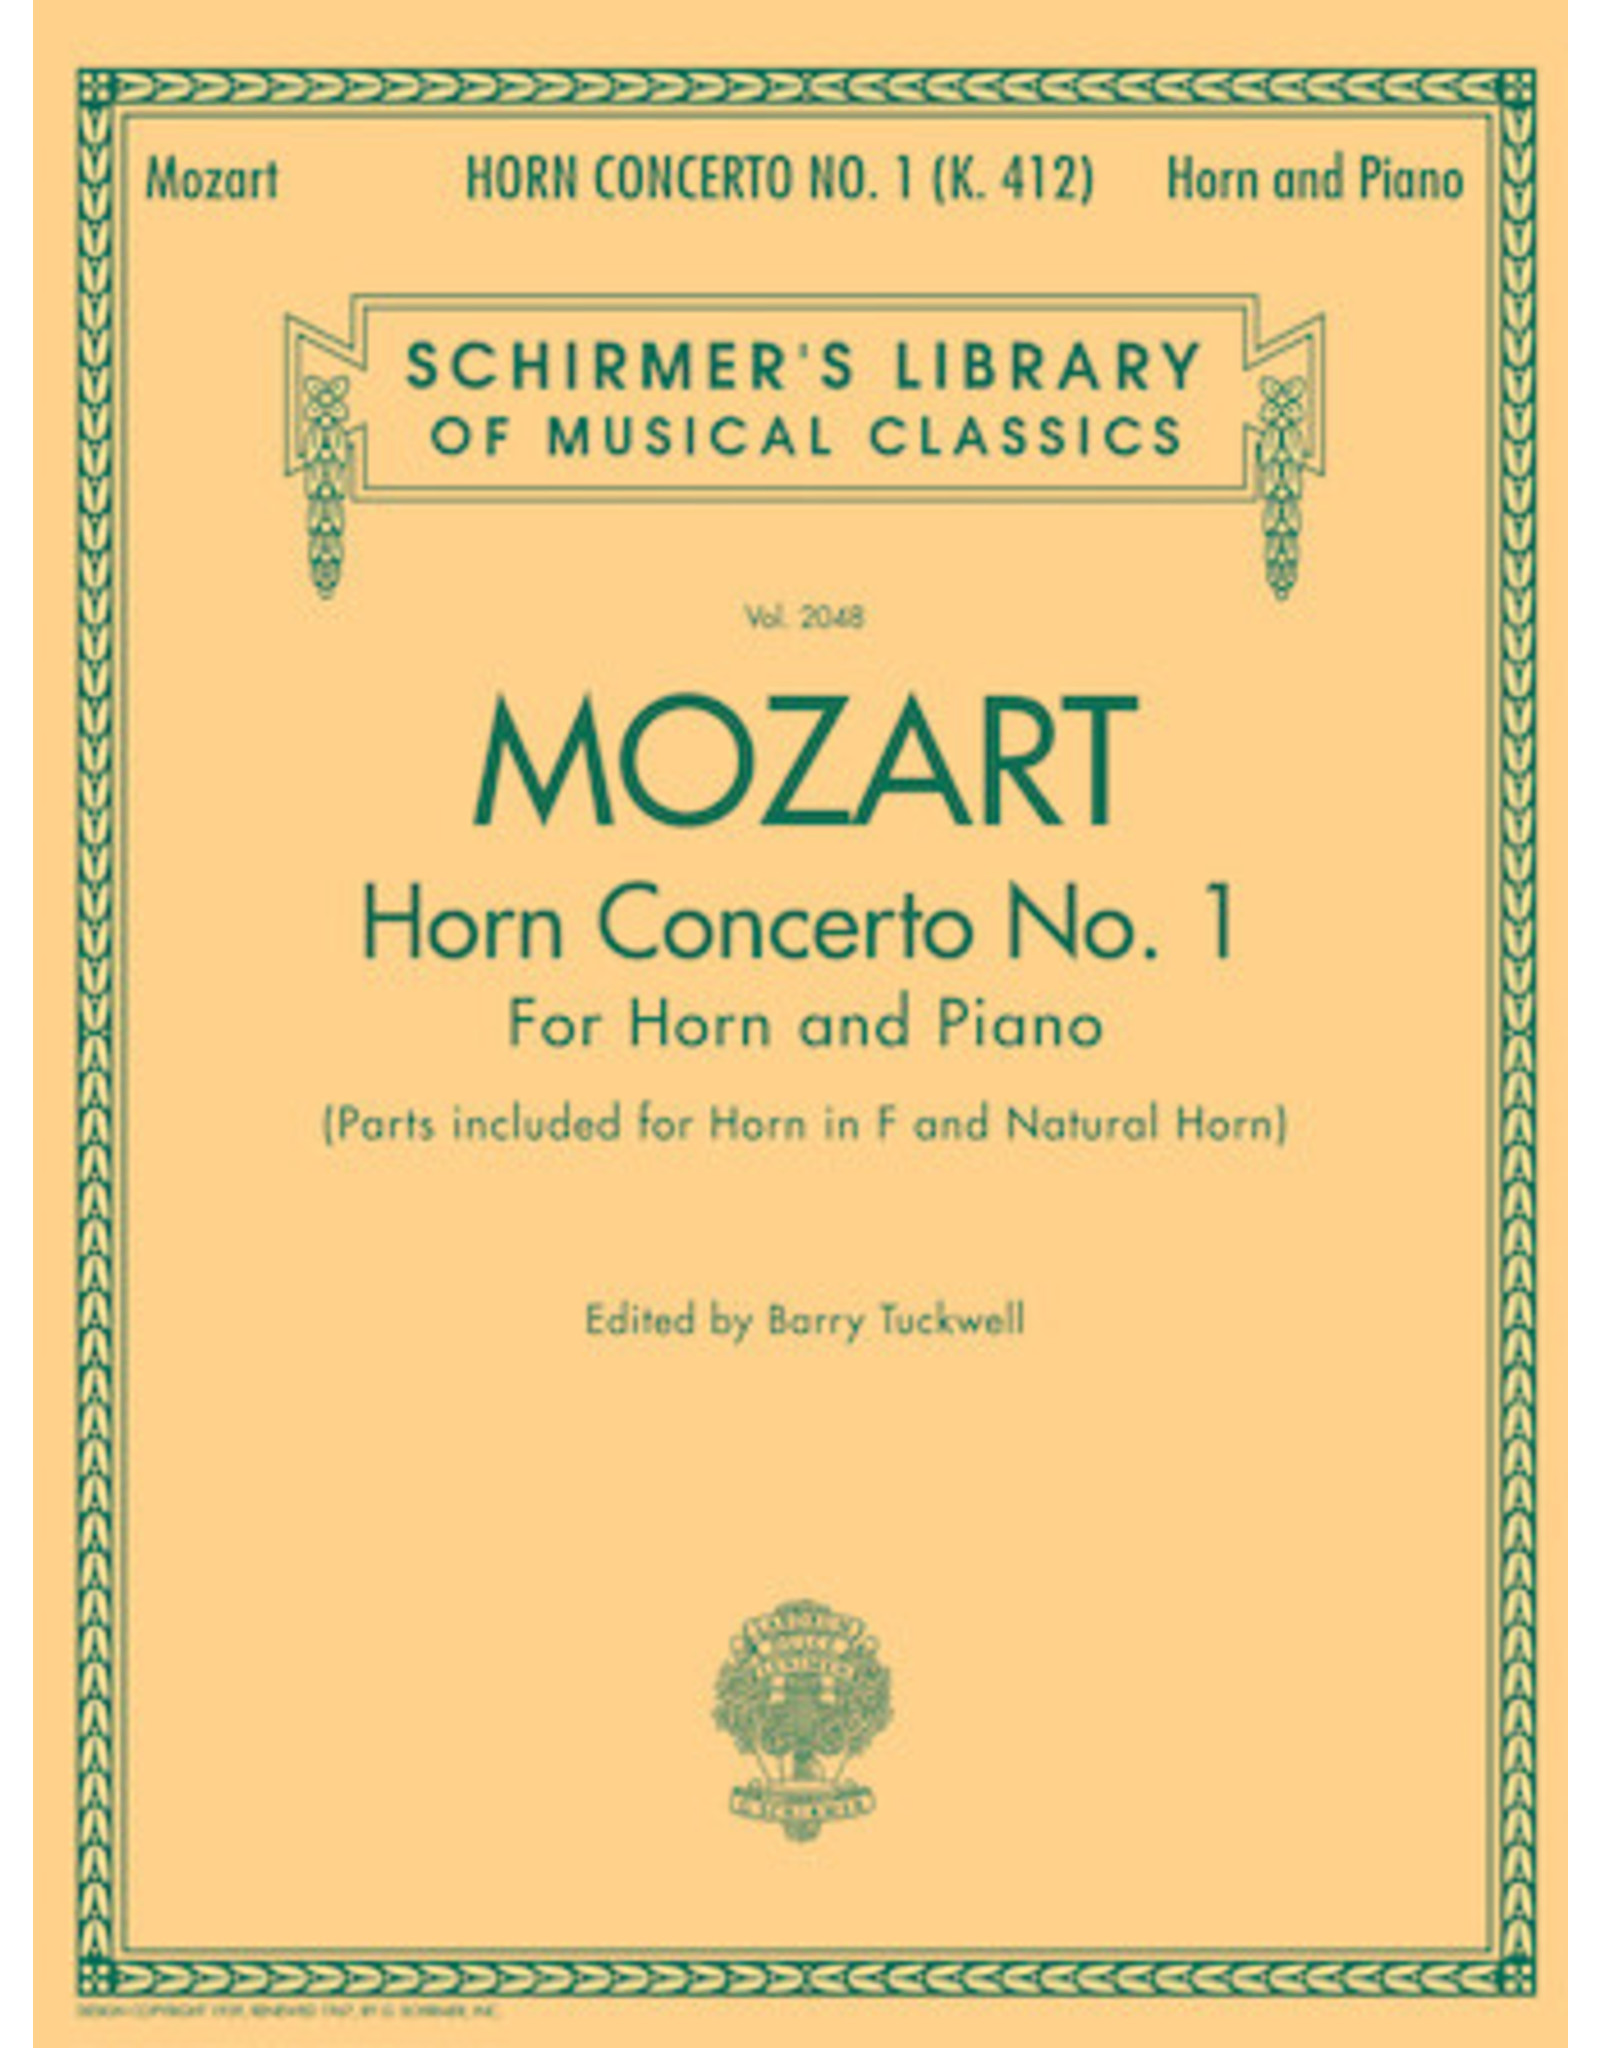 Hal Leonard Concerto No. 1, K. 412 Schirmer Library of Classics Volume 2048 edited by Barry Tuckwell